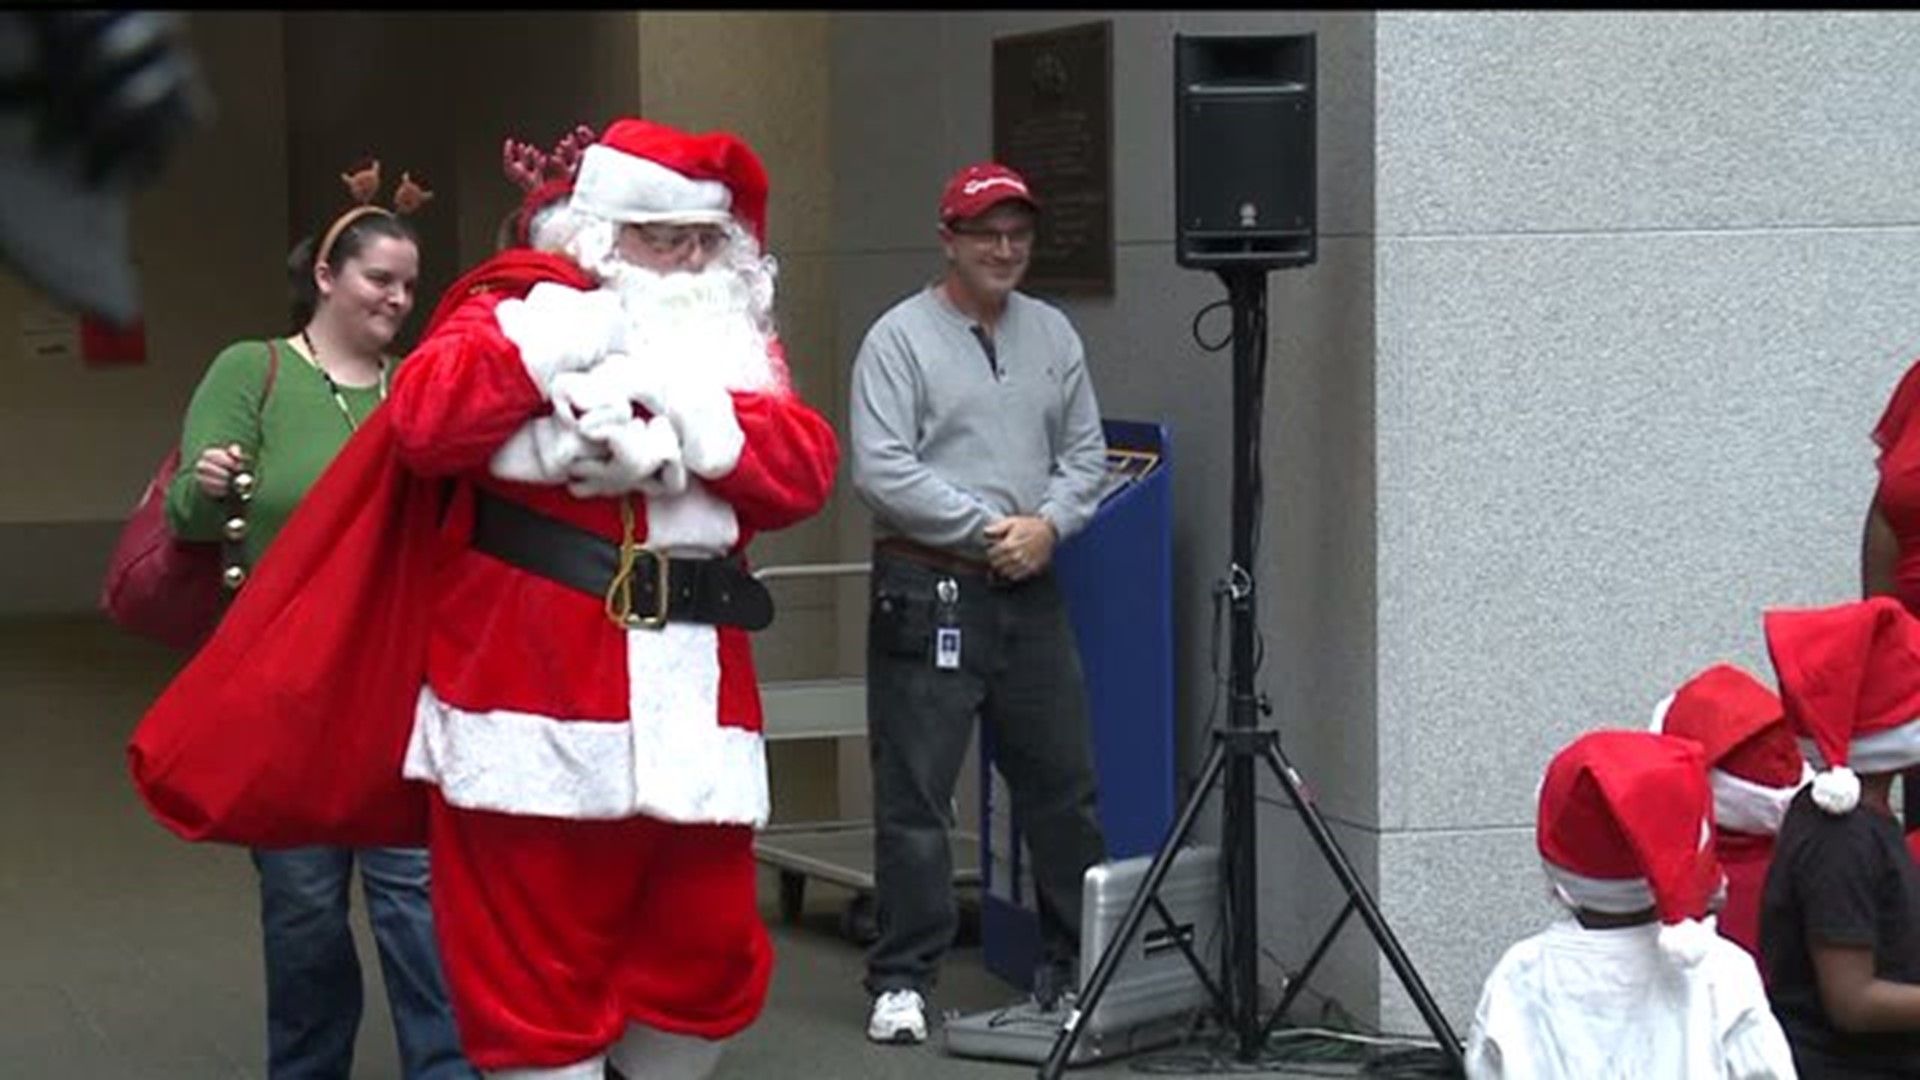 "Holiday Wish Program" Giving gifts to families in need